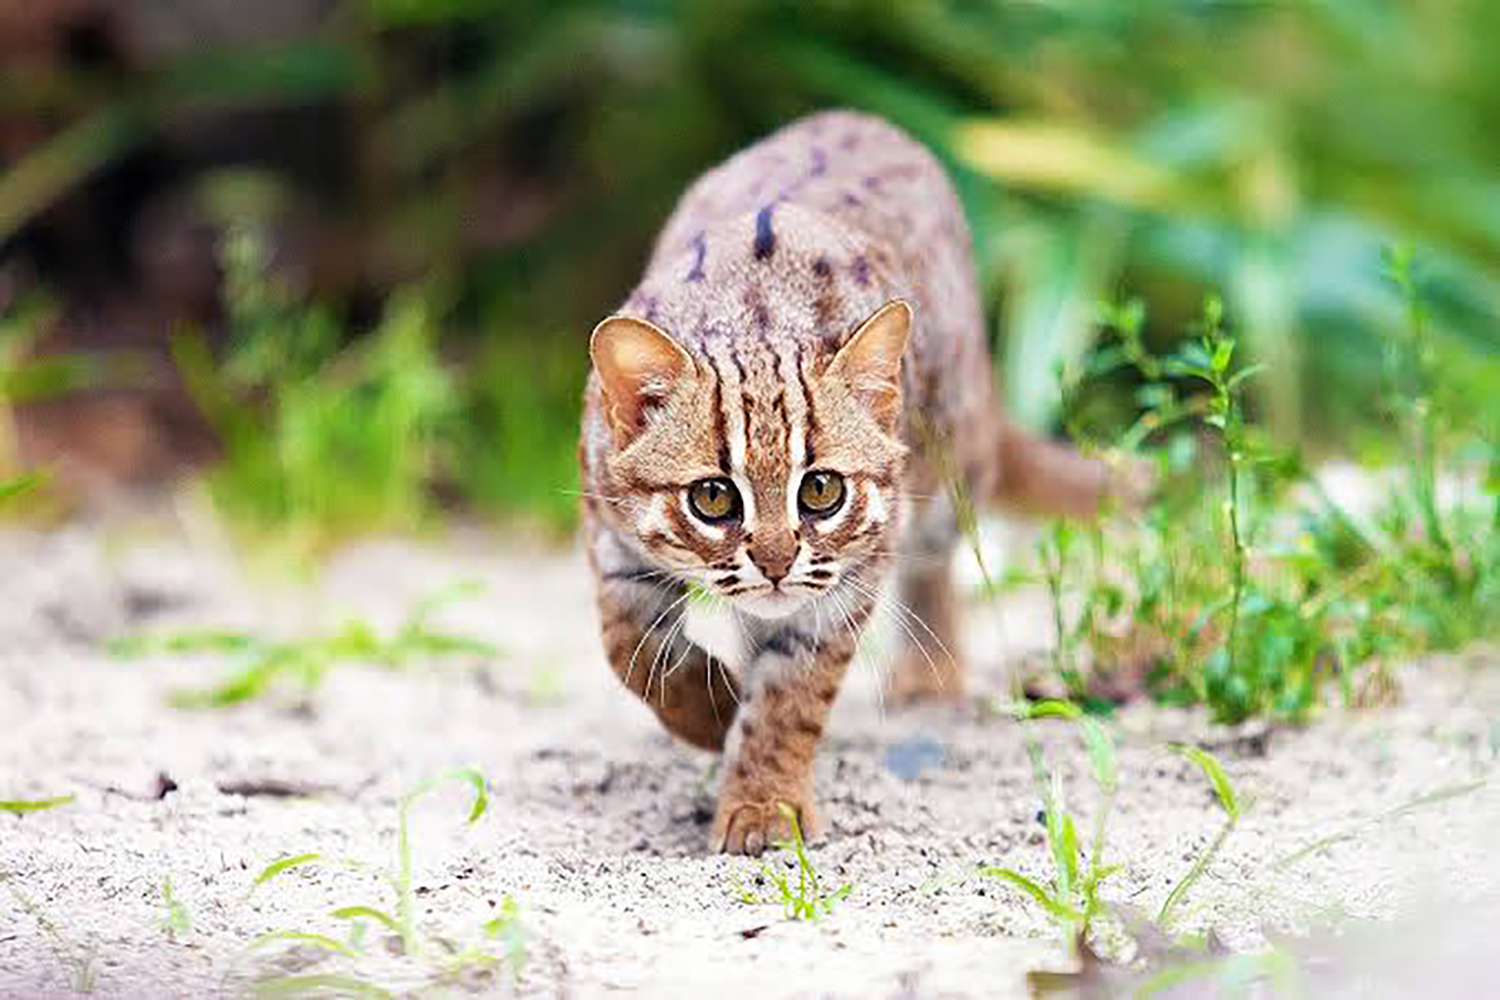 Meet the Rusty-Spotted Cat